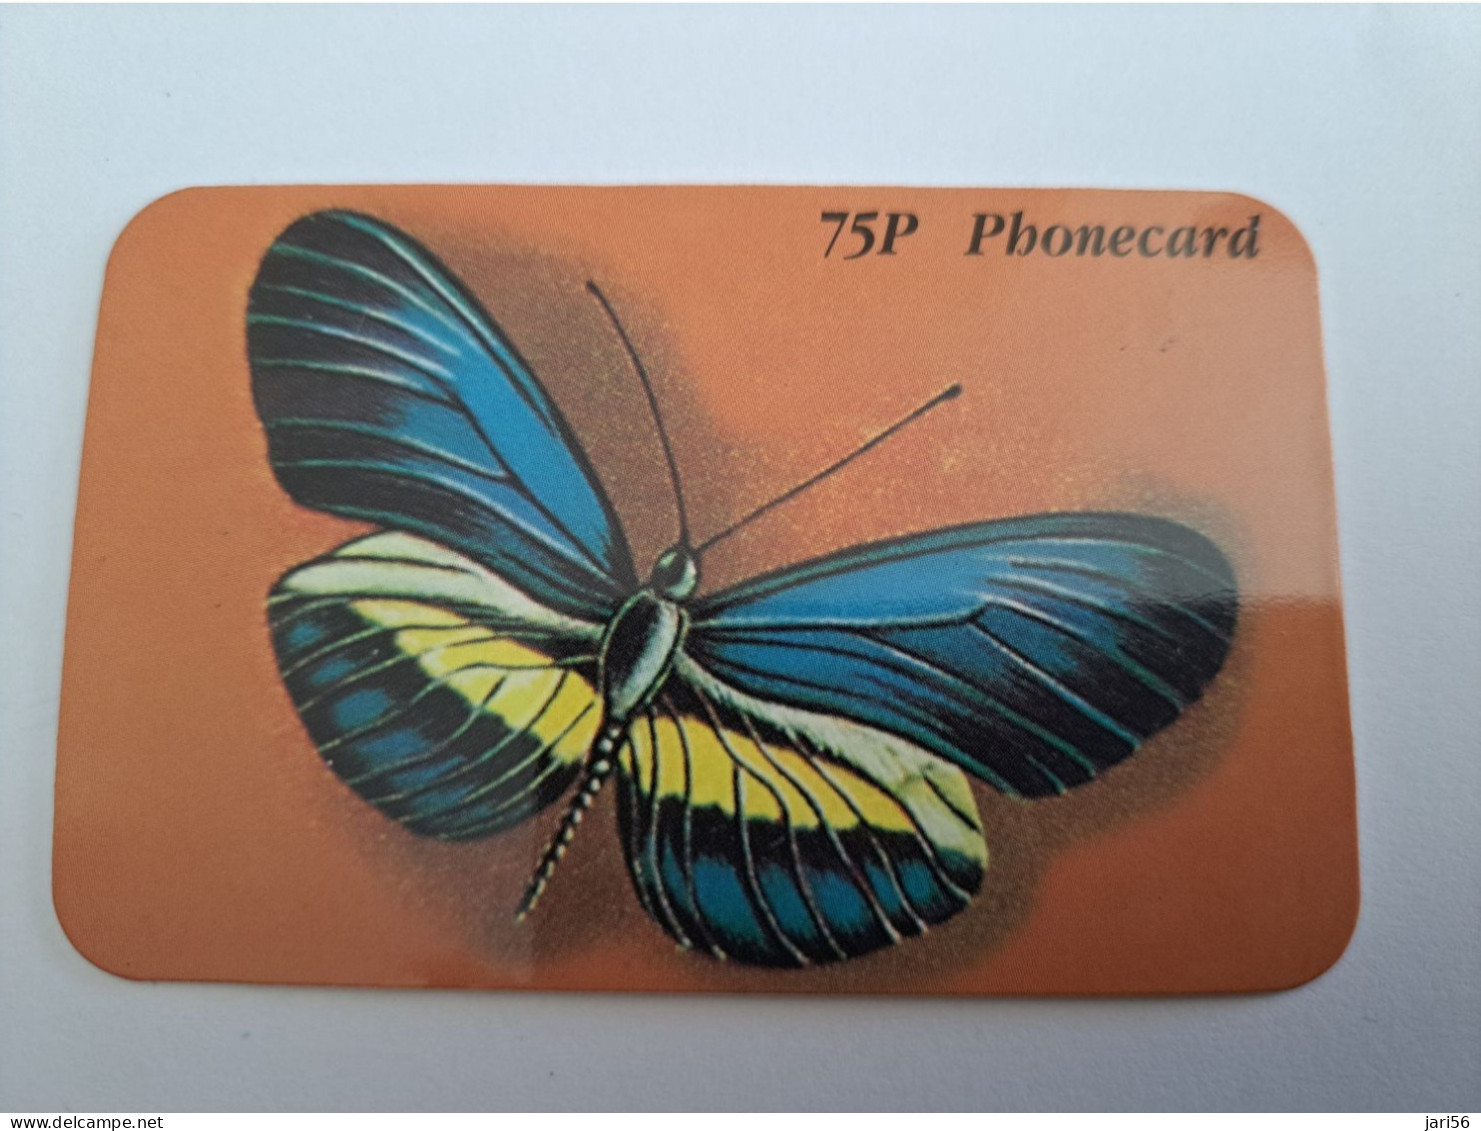 GREAT BRITAIN  / DISCOUNT PHONECARD/BUTTERFLY / 75 PENCE    PREPAID CARD / MINT      **13584** - [10] Colecciones